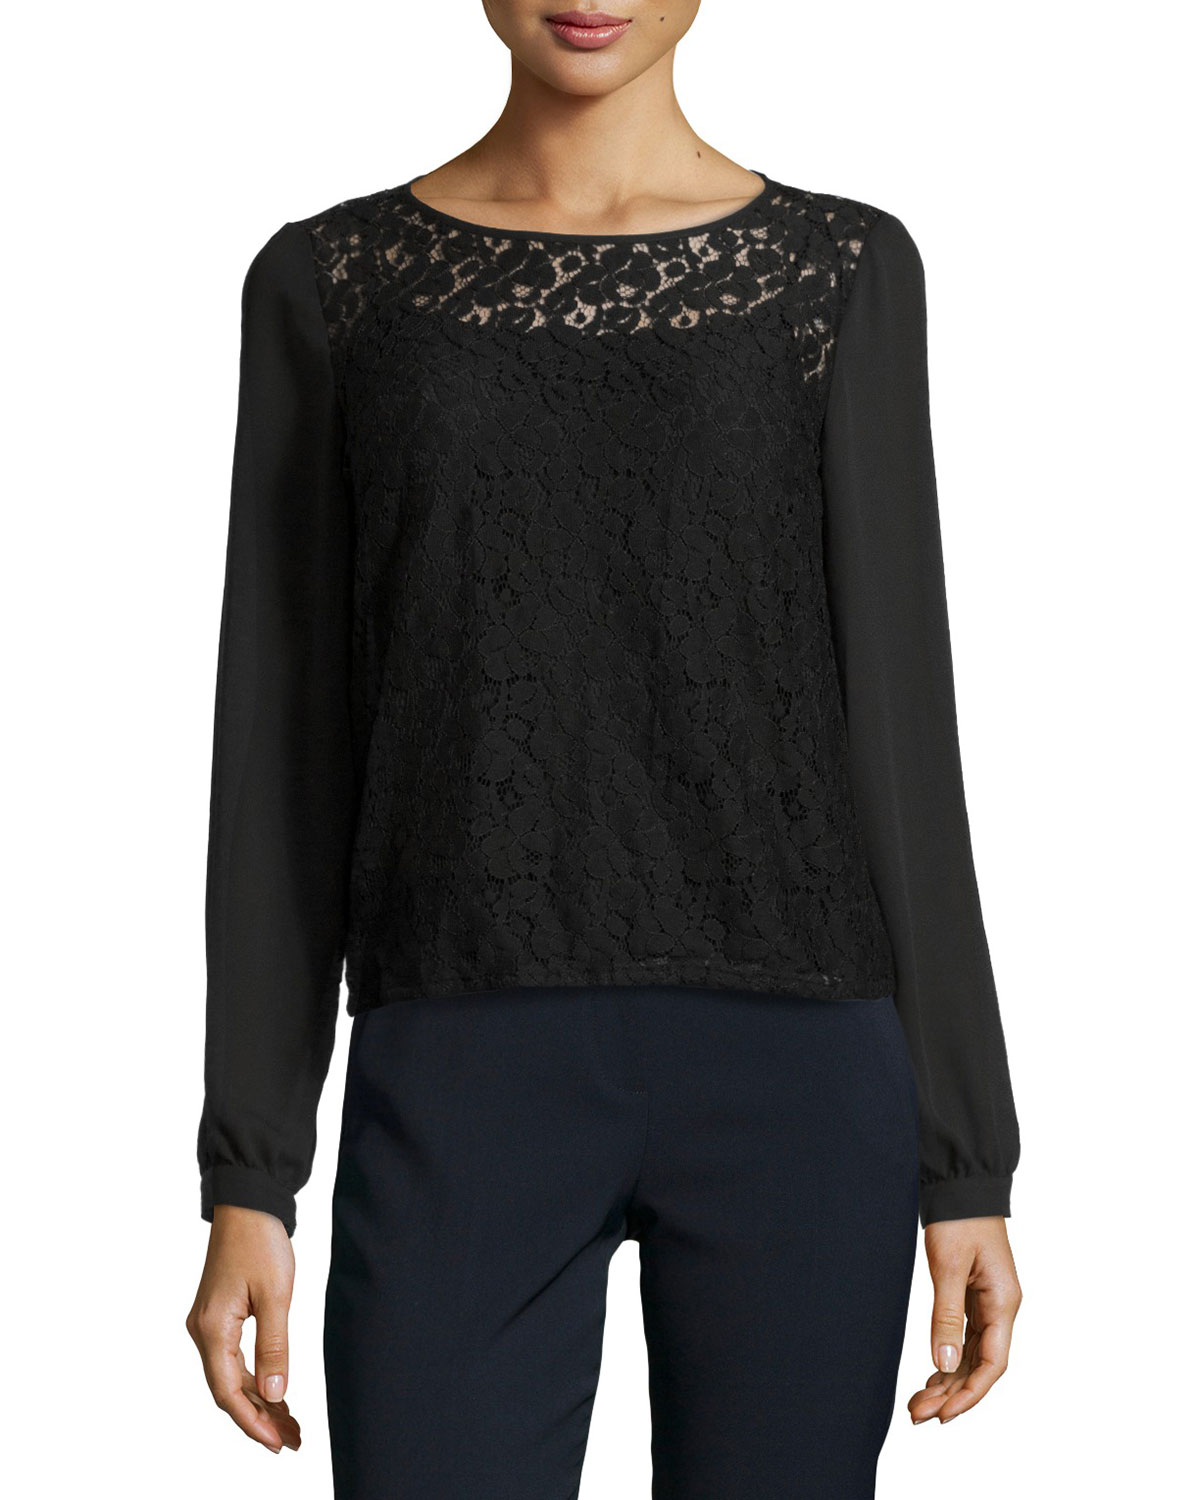 Lyst - Laundry By Shelli Segal Long-Sleeve Lace Blouse in Black